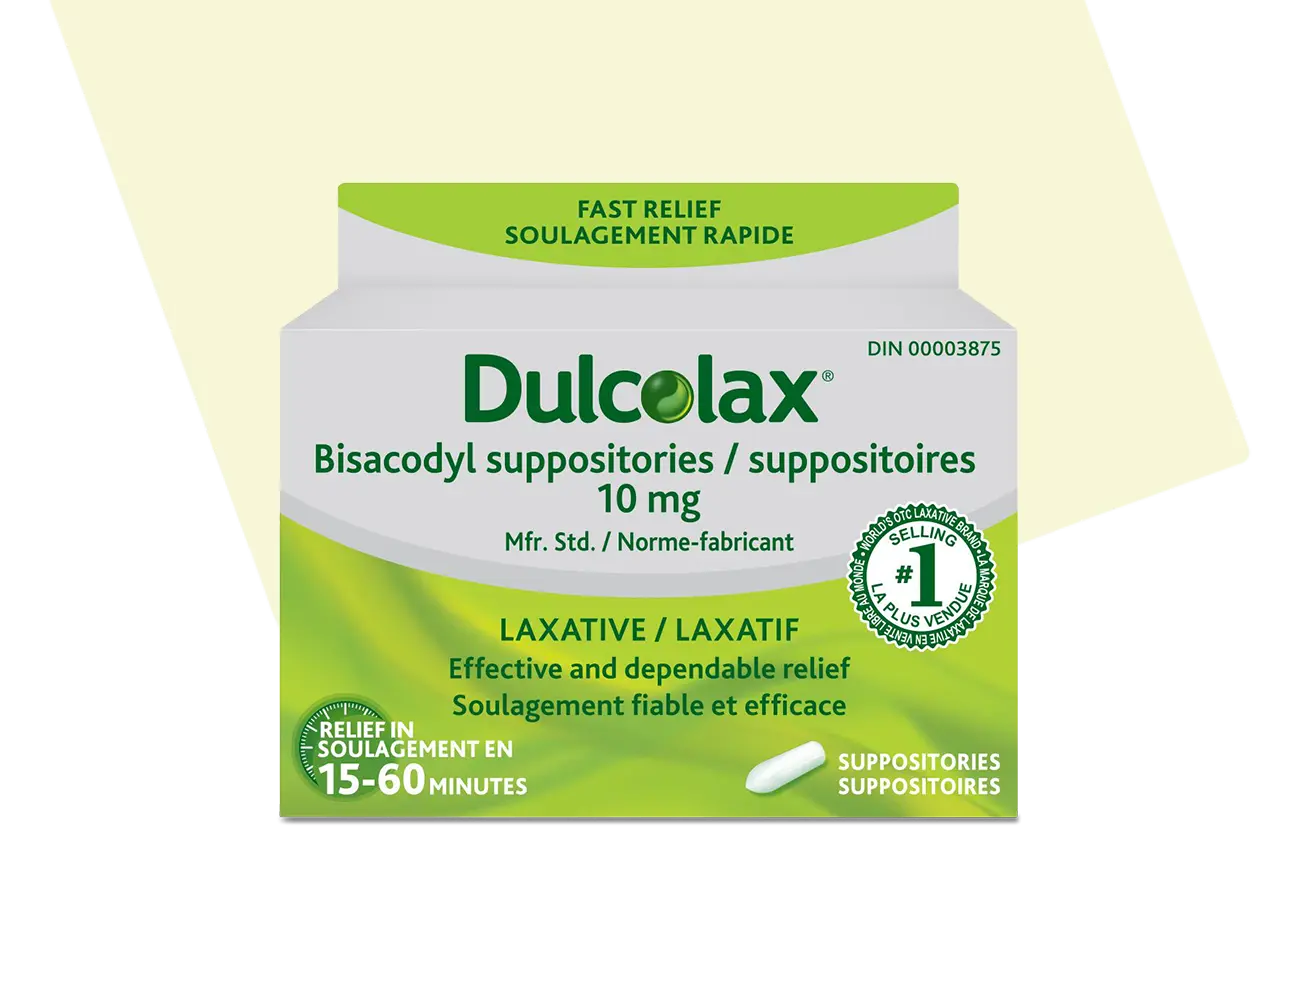 Dulcolax Comfort-Shaped Laxative Suppositories, Relief Constipation, 4Ct,  4-Pack